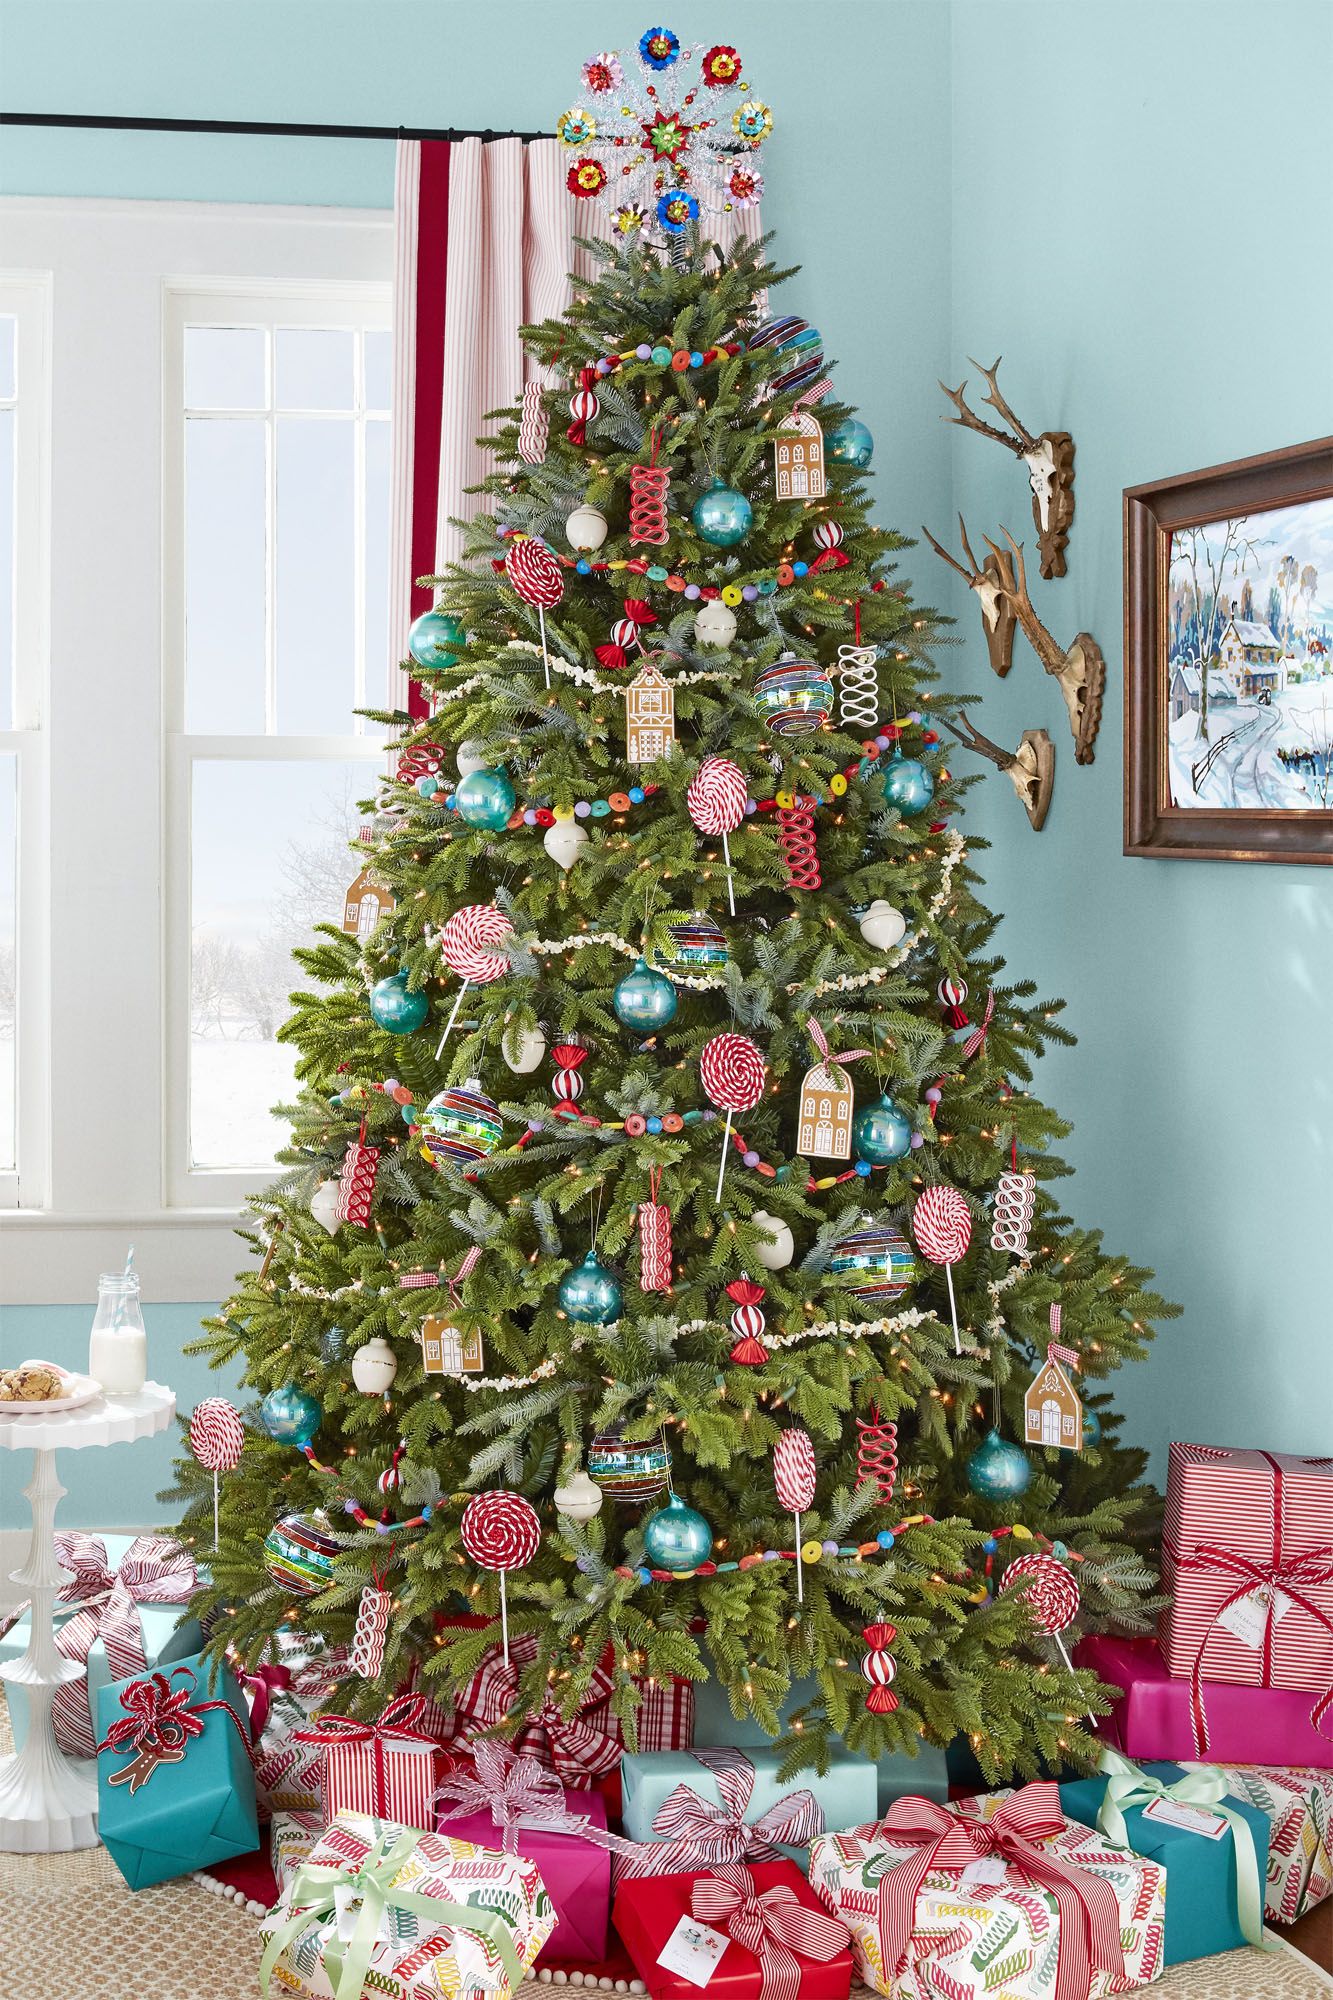 Macrame Trends in Decorating, Christmas Trees